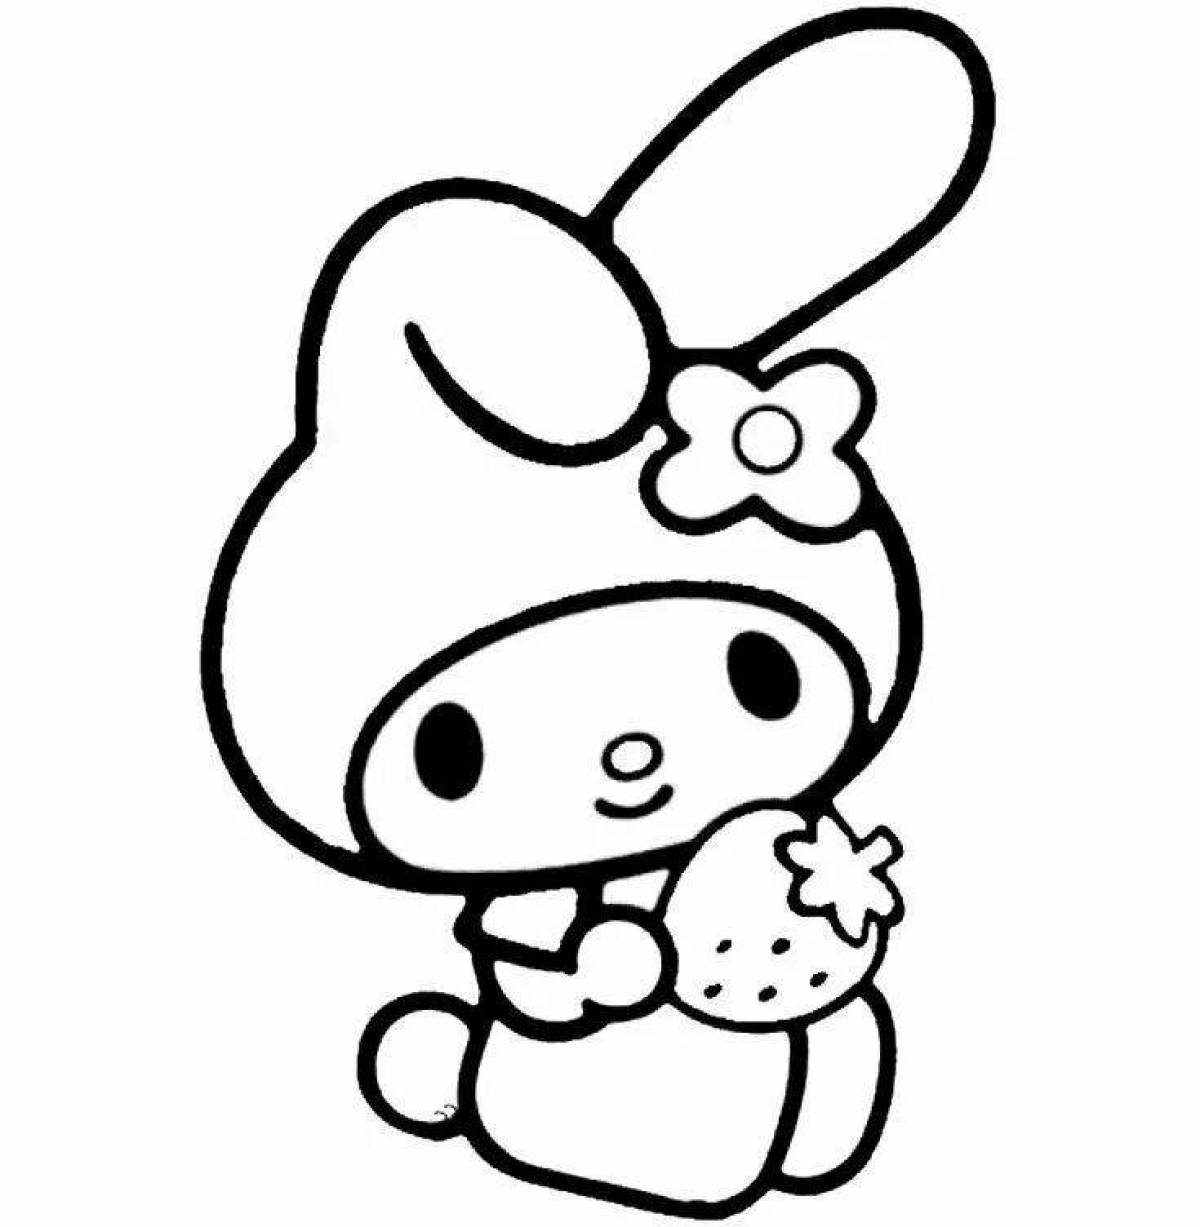 Fancy chicks hello kitty coloring book